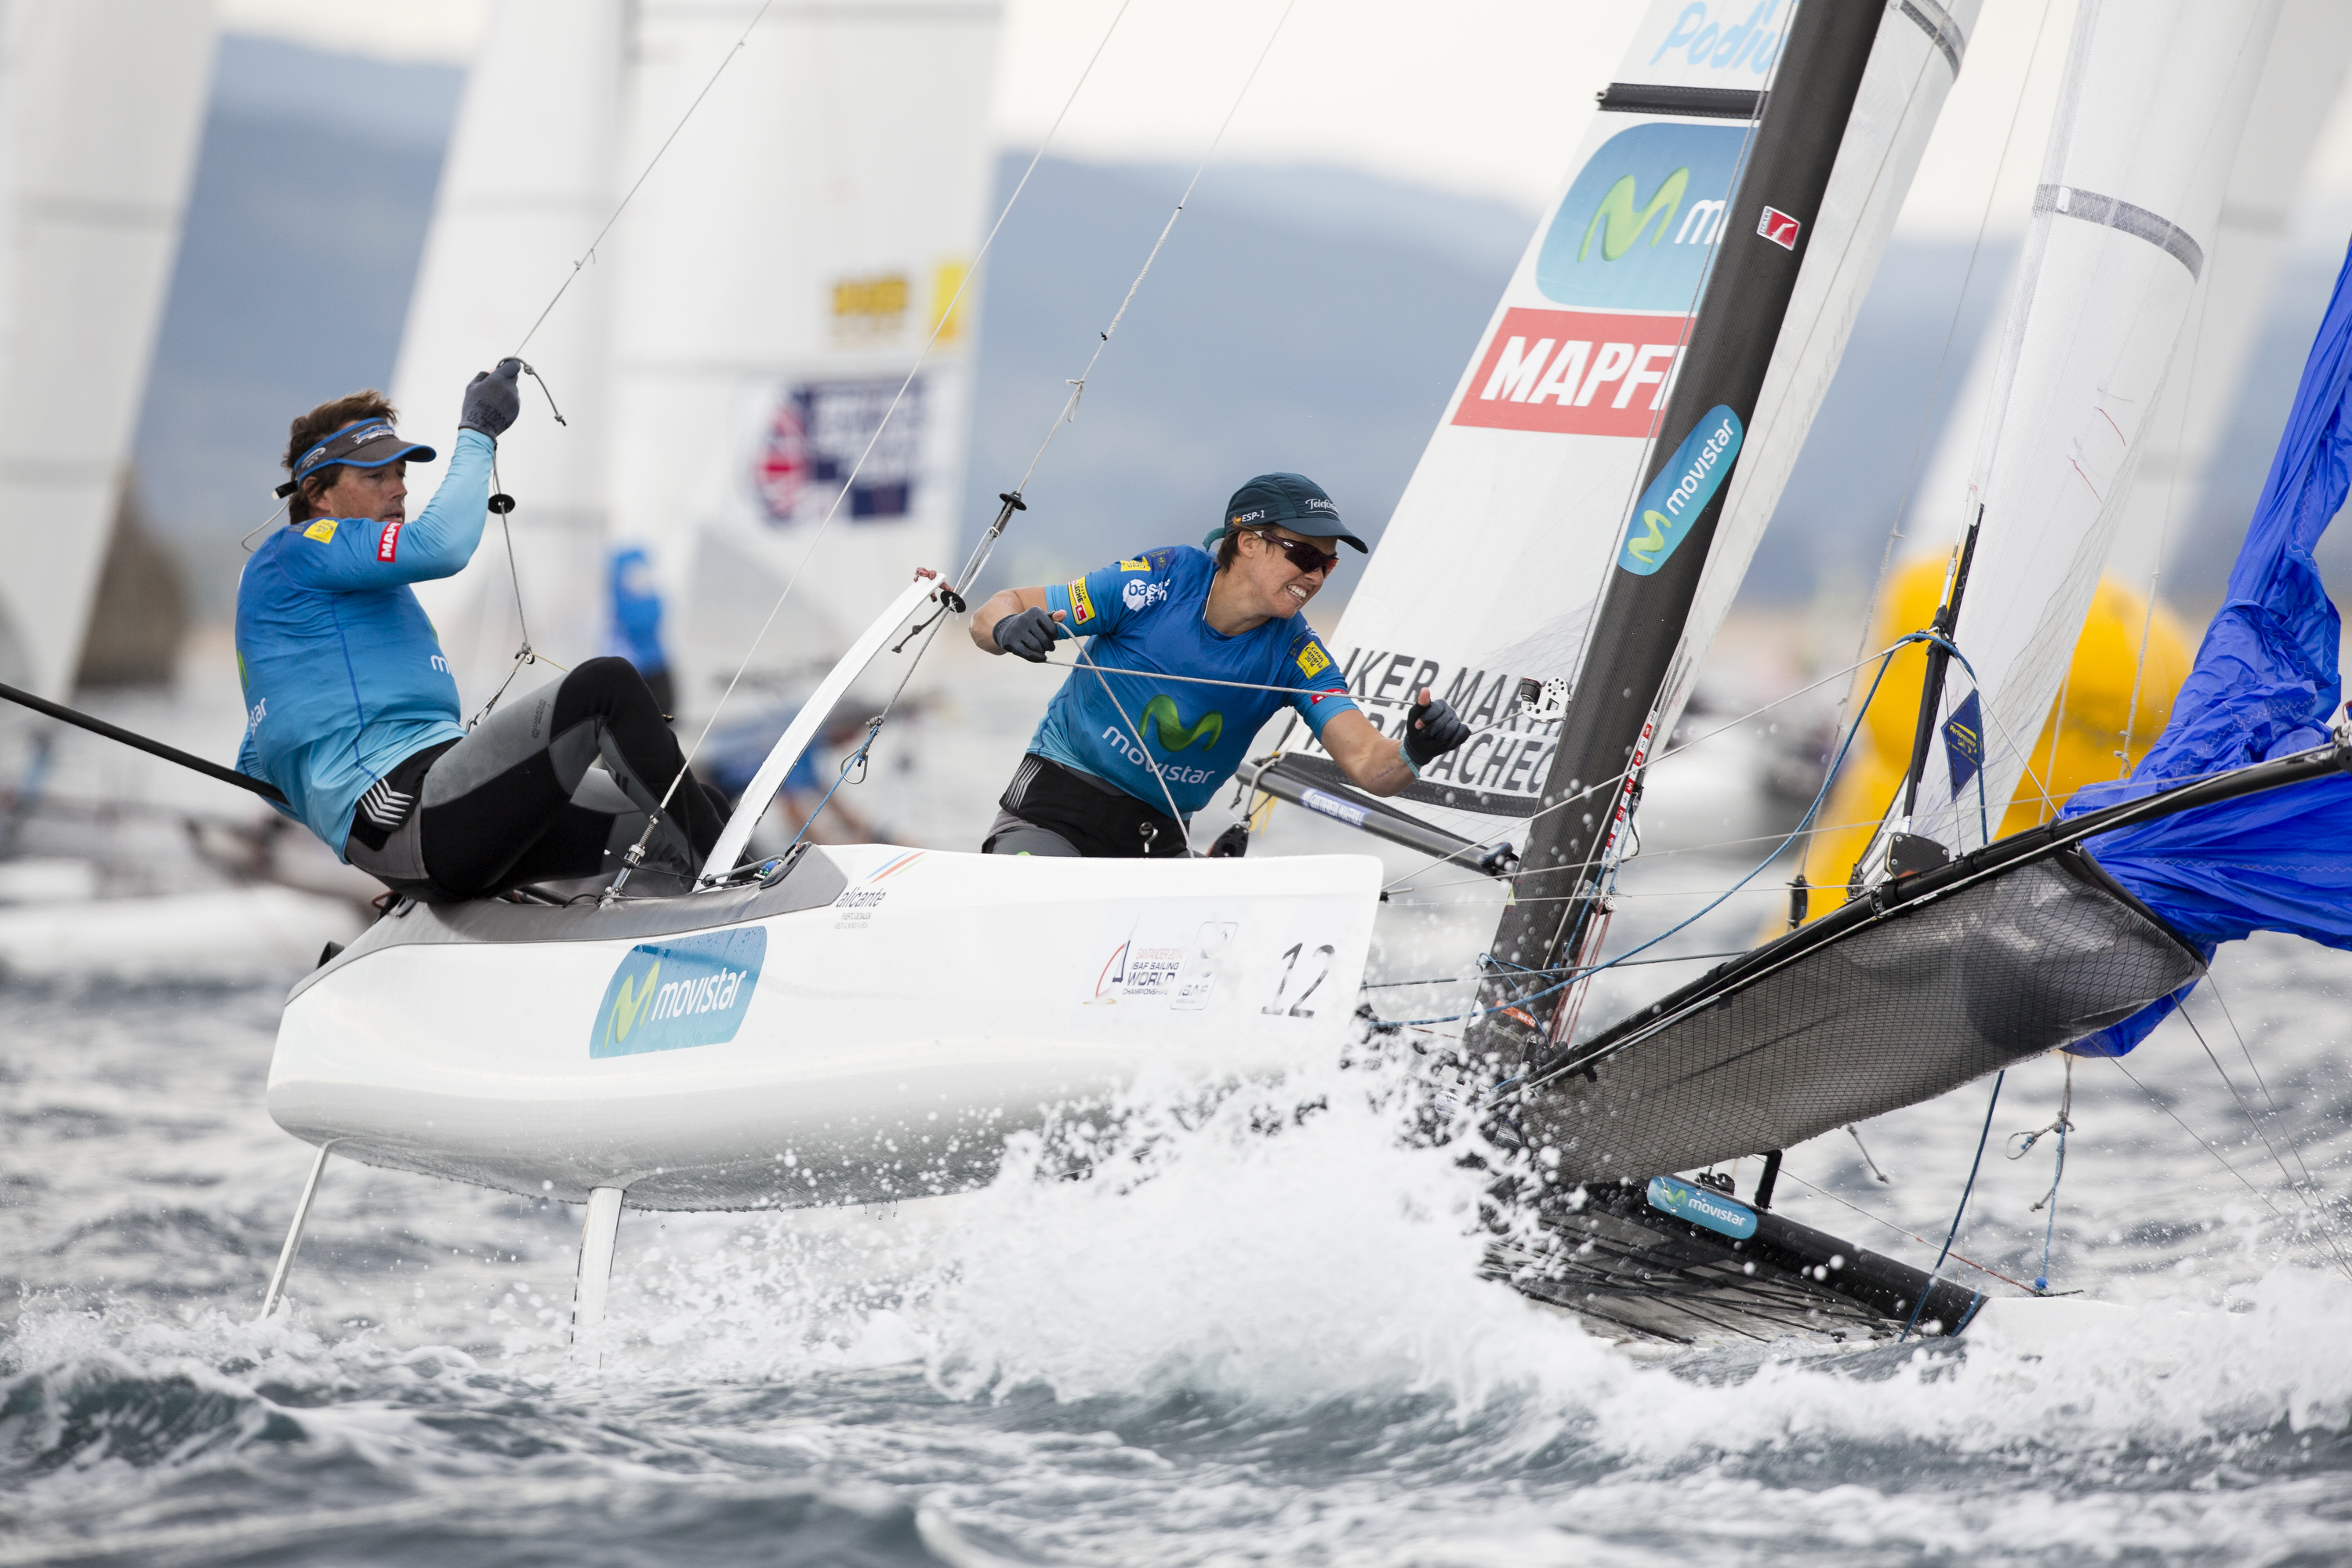 Tara Pacheco during the 2014 ISAF Sailing World Championships in in Santander, Spain. (Mick Anderson/SAILINGPIX—Getty Images)